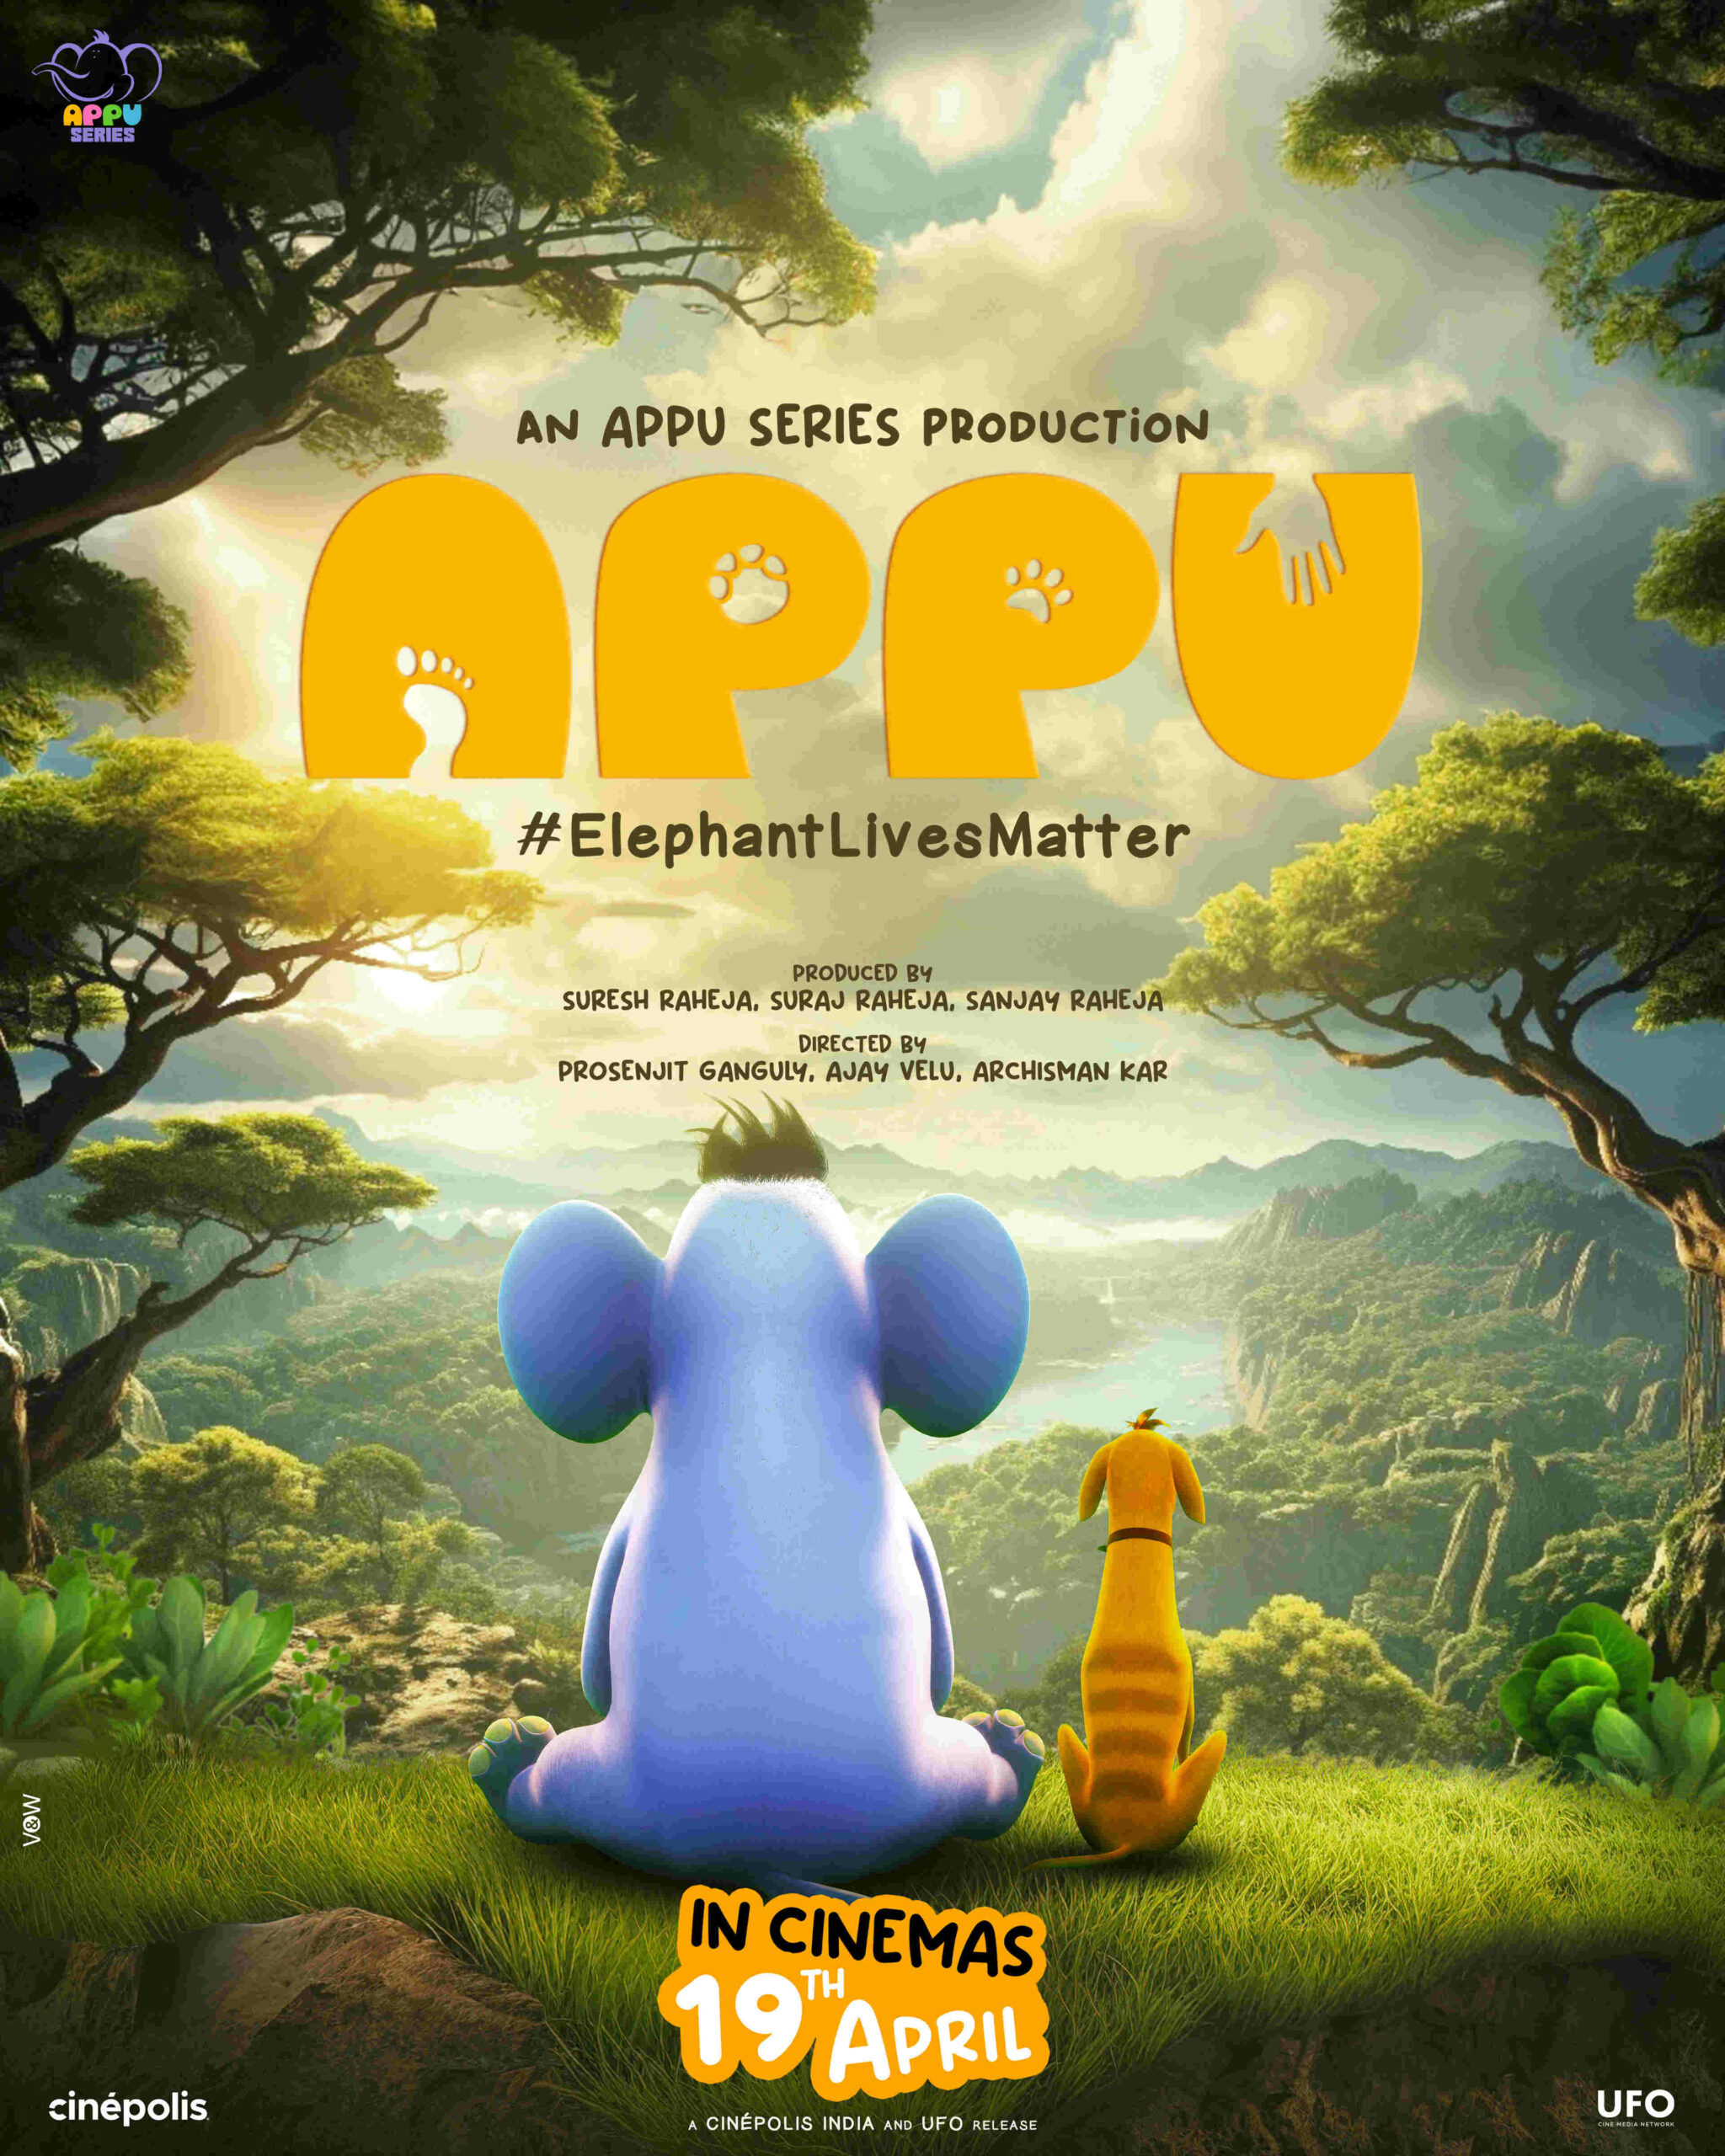 Appu: Inspiring Heroism in Every Child – India’s First 4K Animated Feature Film from Appu Series!